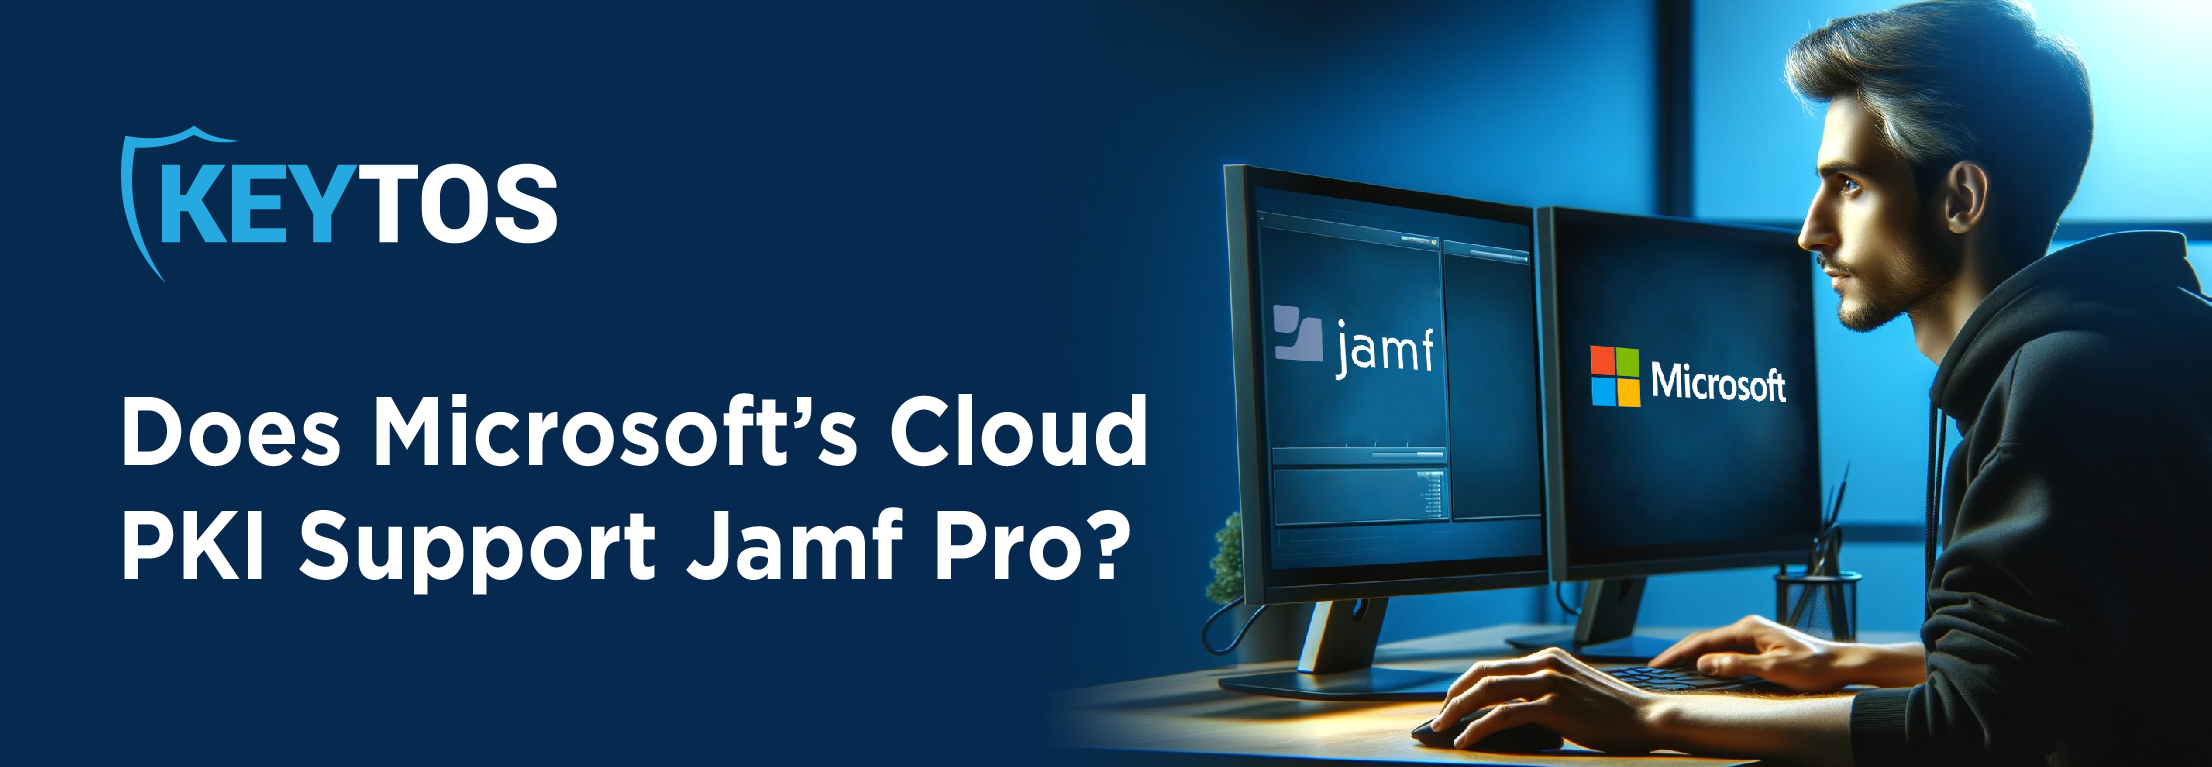 How to set up a Cloud CA for Intune and Jamf Pro